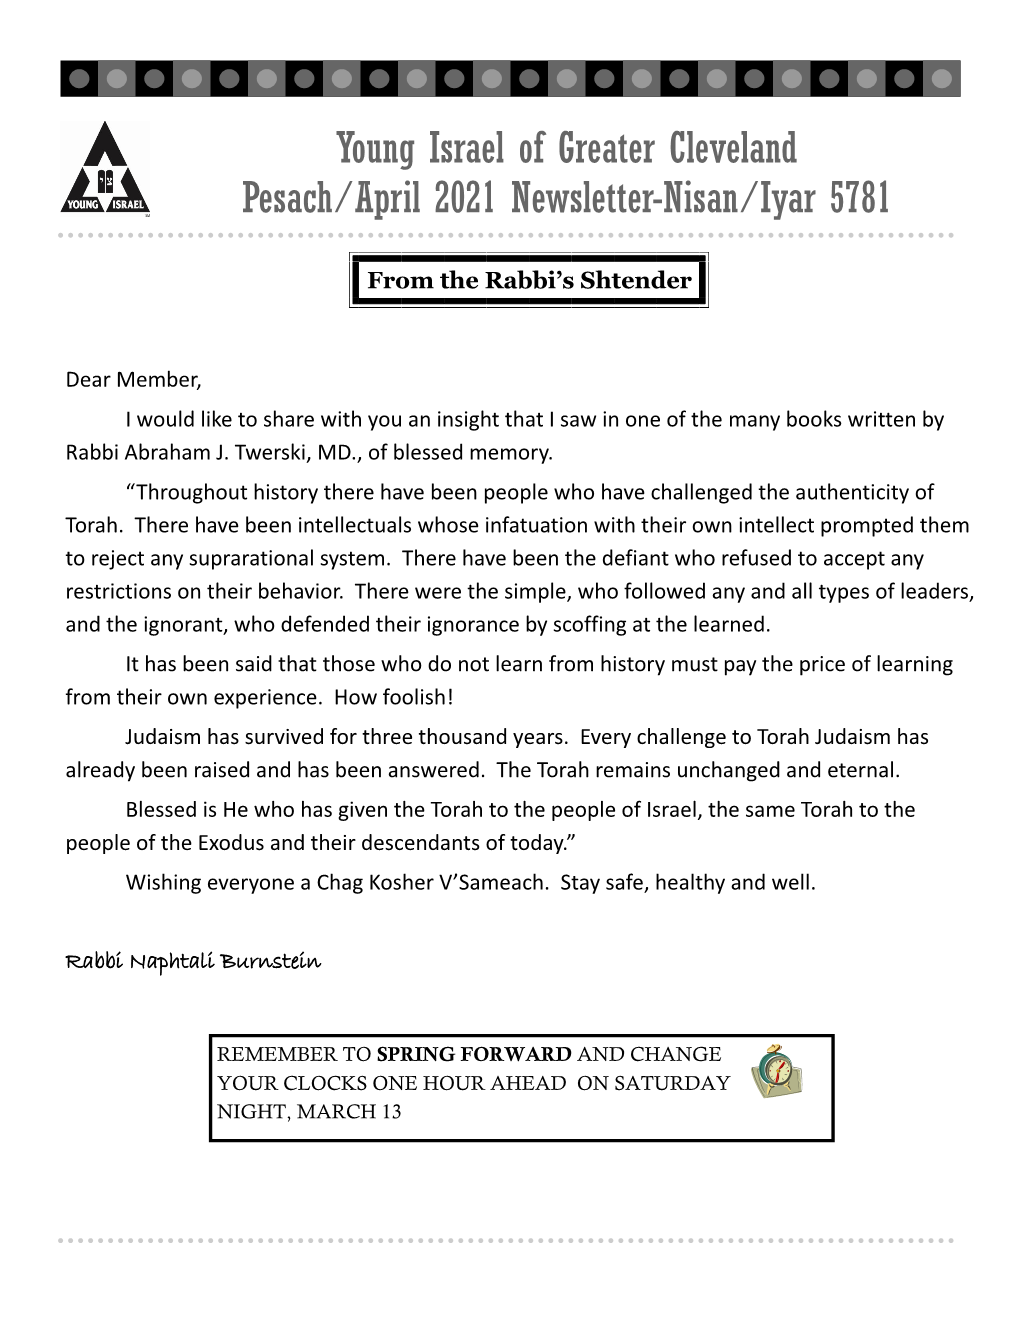 Young Israel of Greater Cleveland Pesach/April 2021 Newsletter-Nisan/Iyar 5781